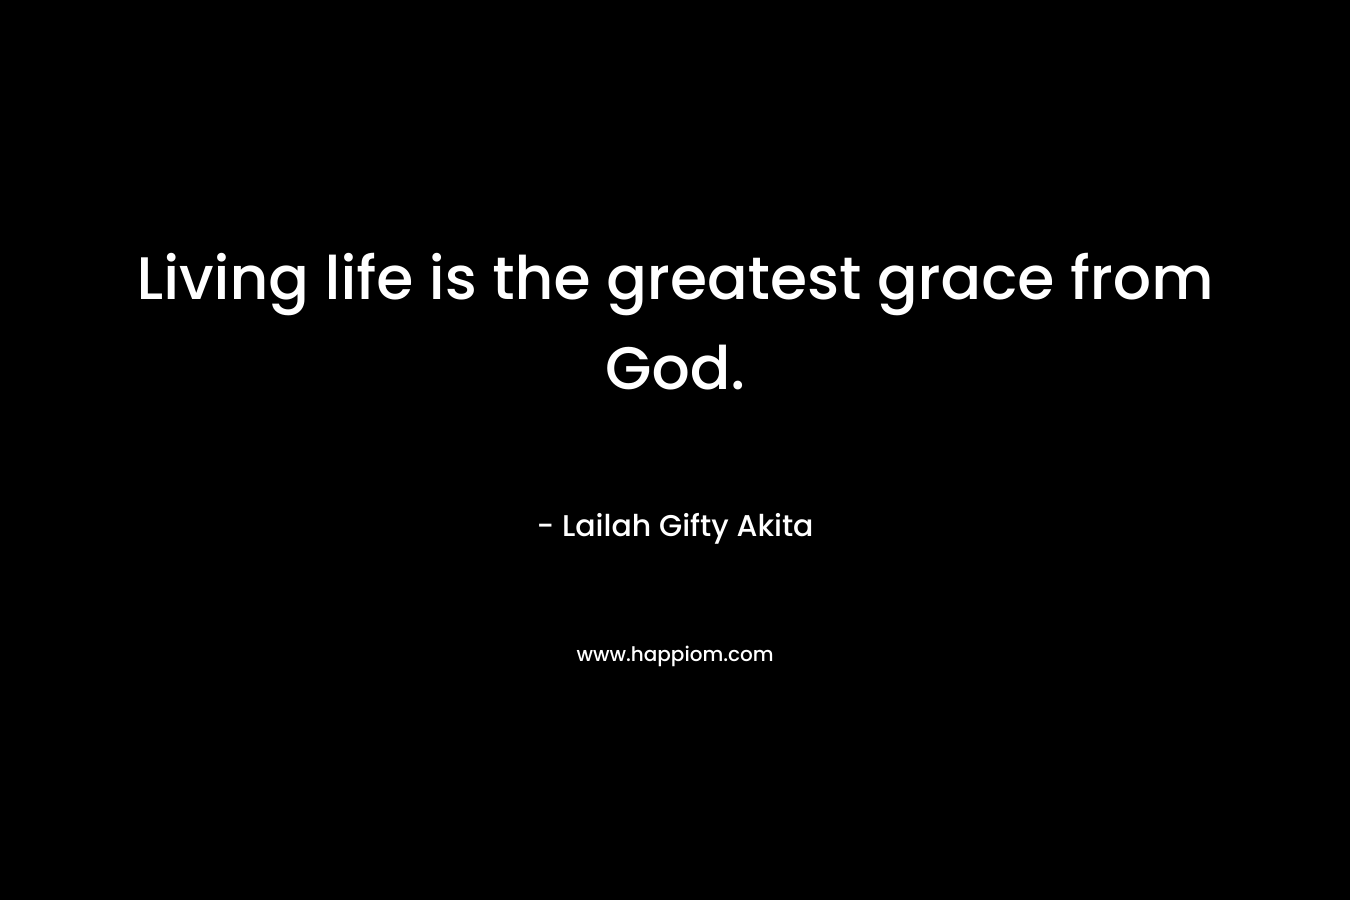 Living life is the greatest grace from God.